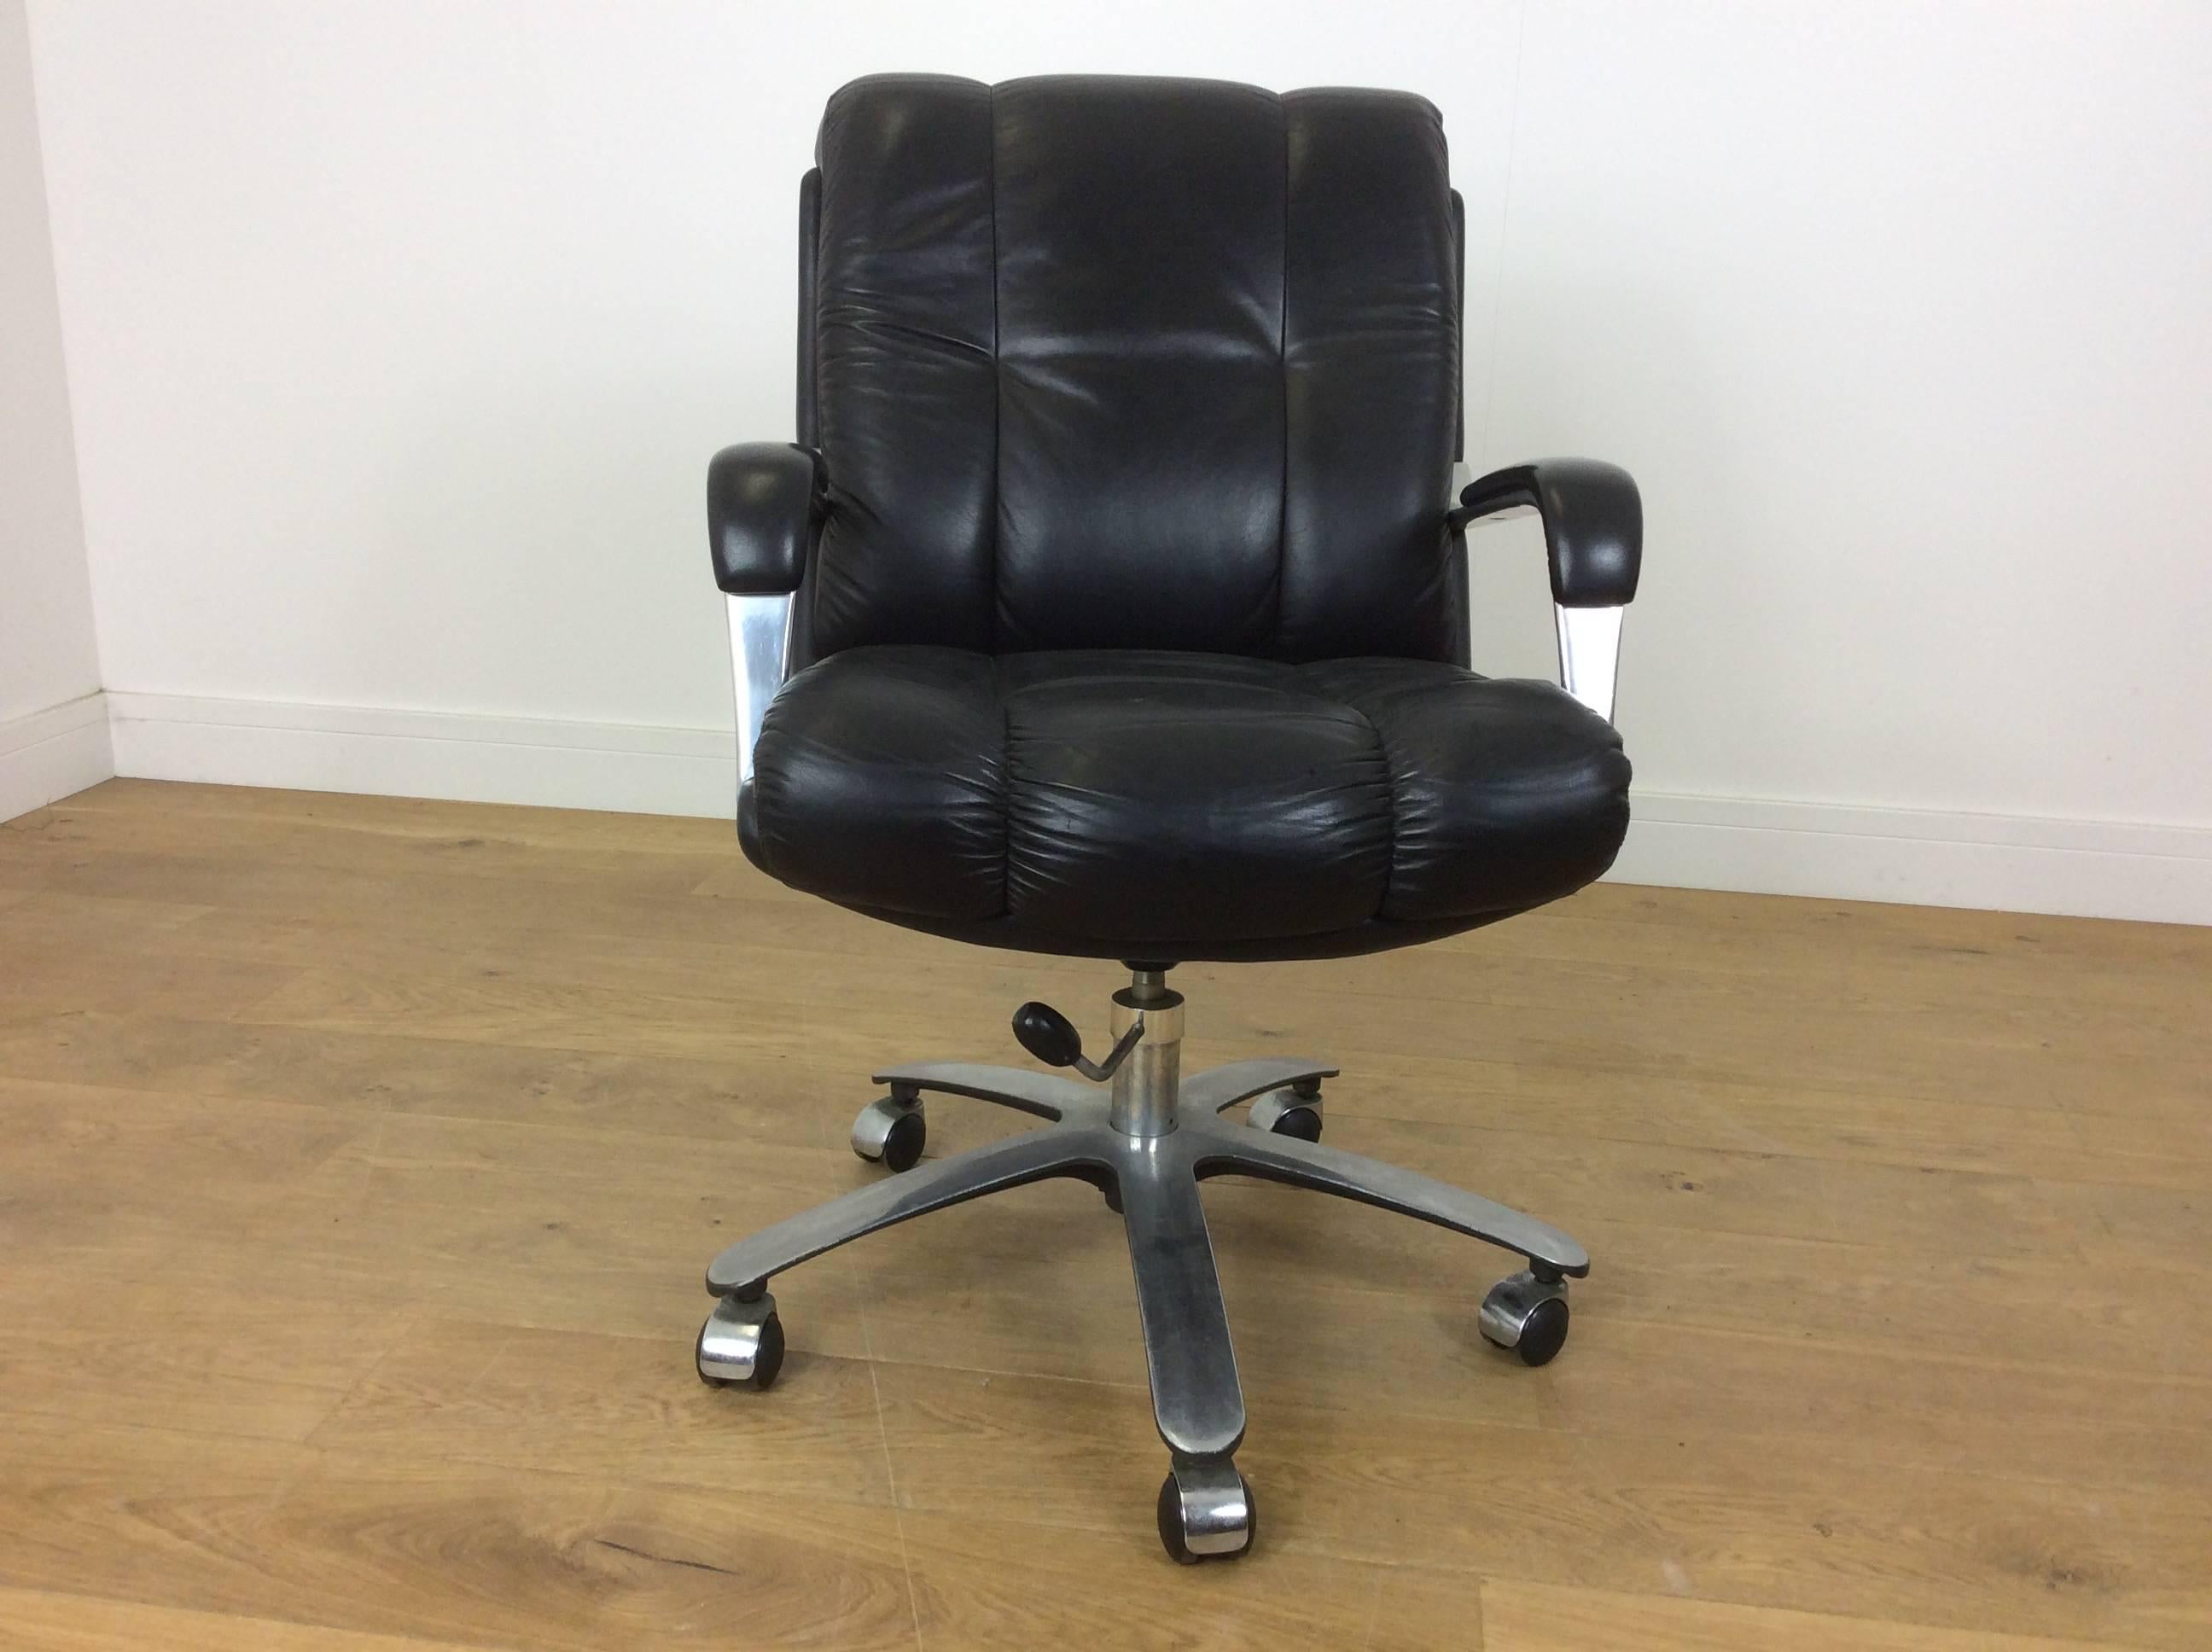 Midcentury swivel desk chair with height adjustment.
Very comfortable midcentury office chair in black leather.
Measures: 60 cm W, 70 cm D seat D 47 cm height adjustable,
circa 1960.

3 Available, price per chair
 